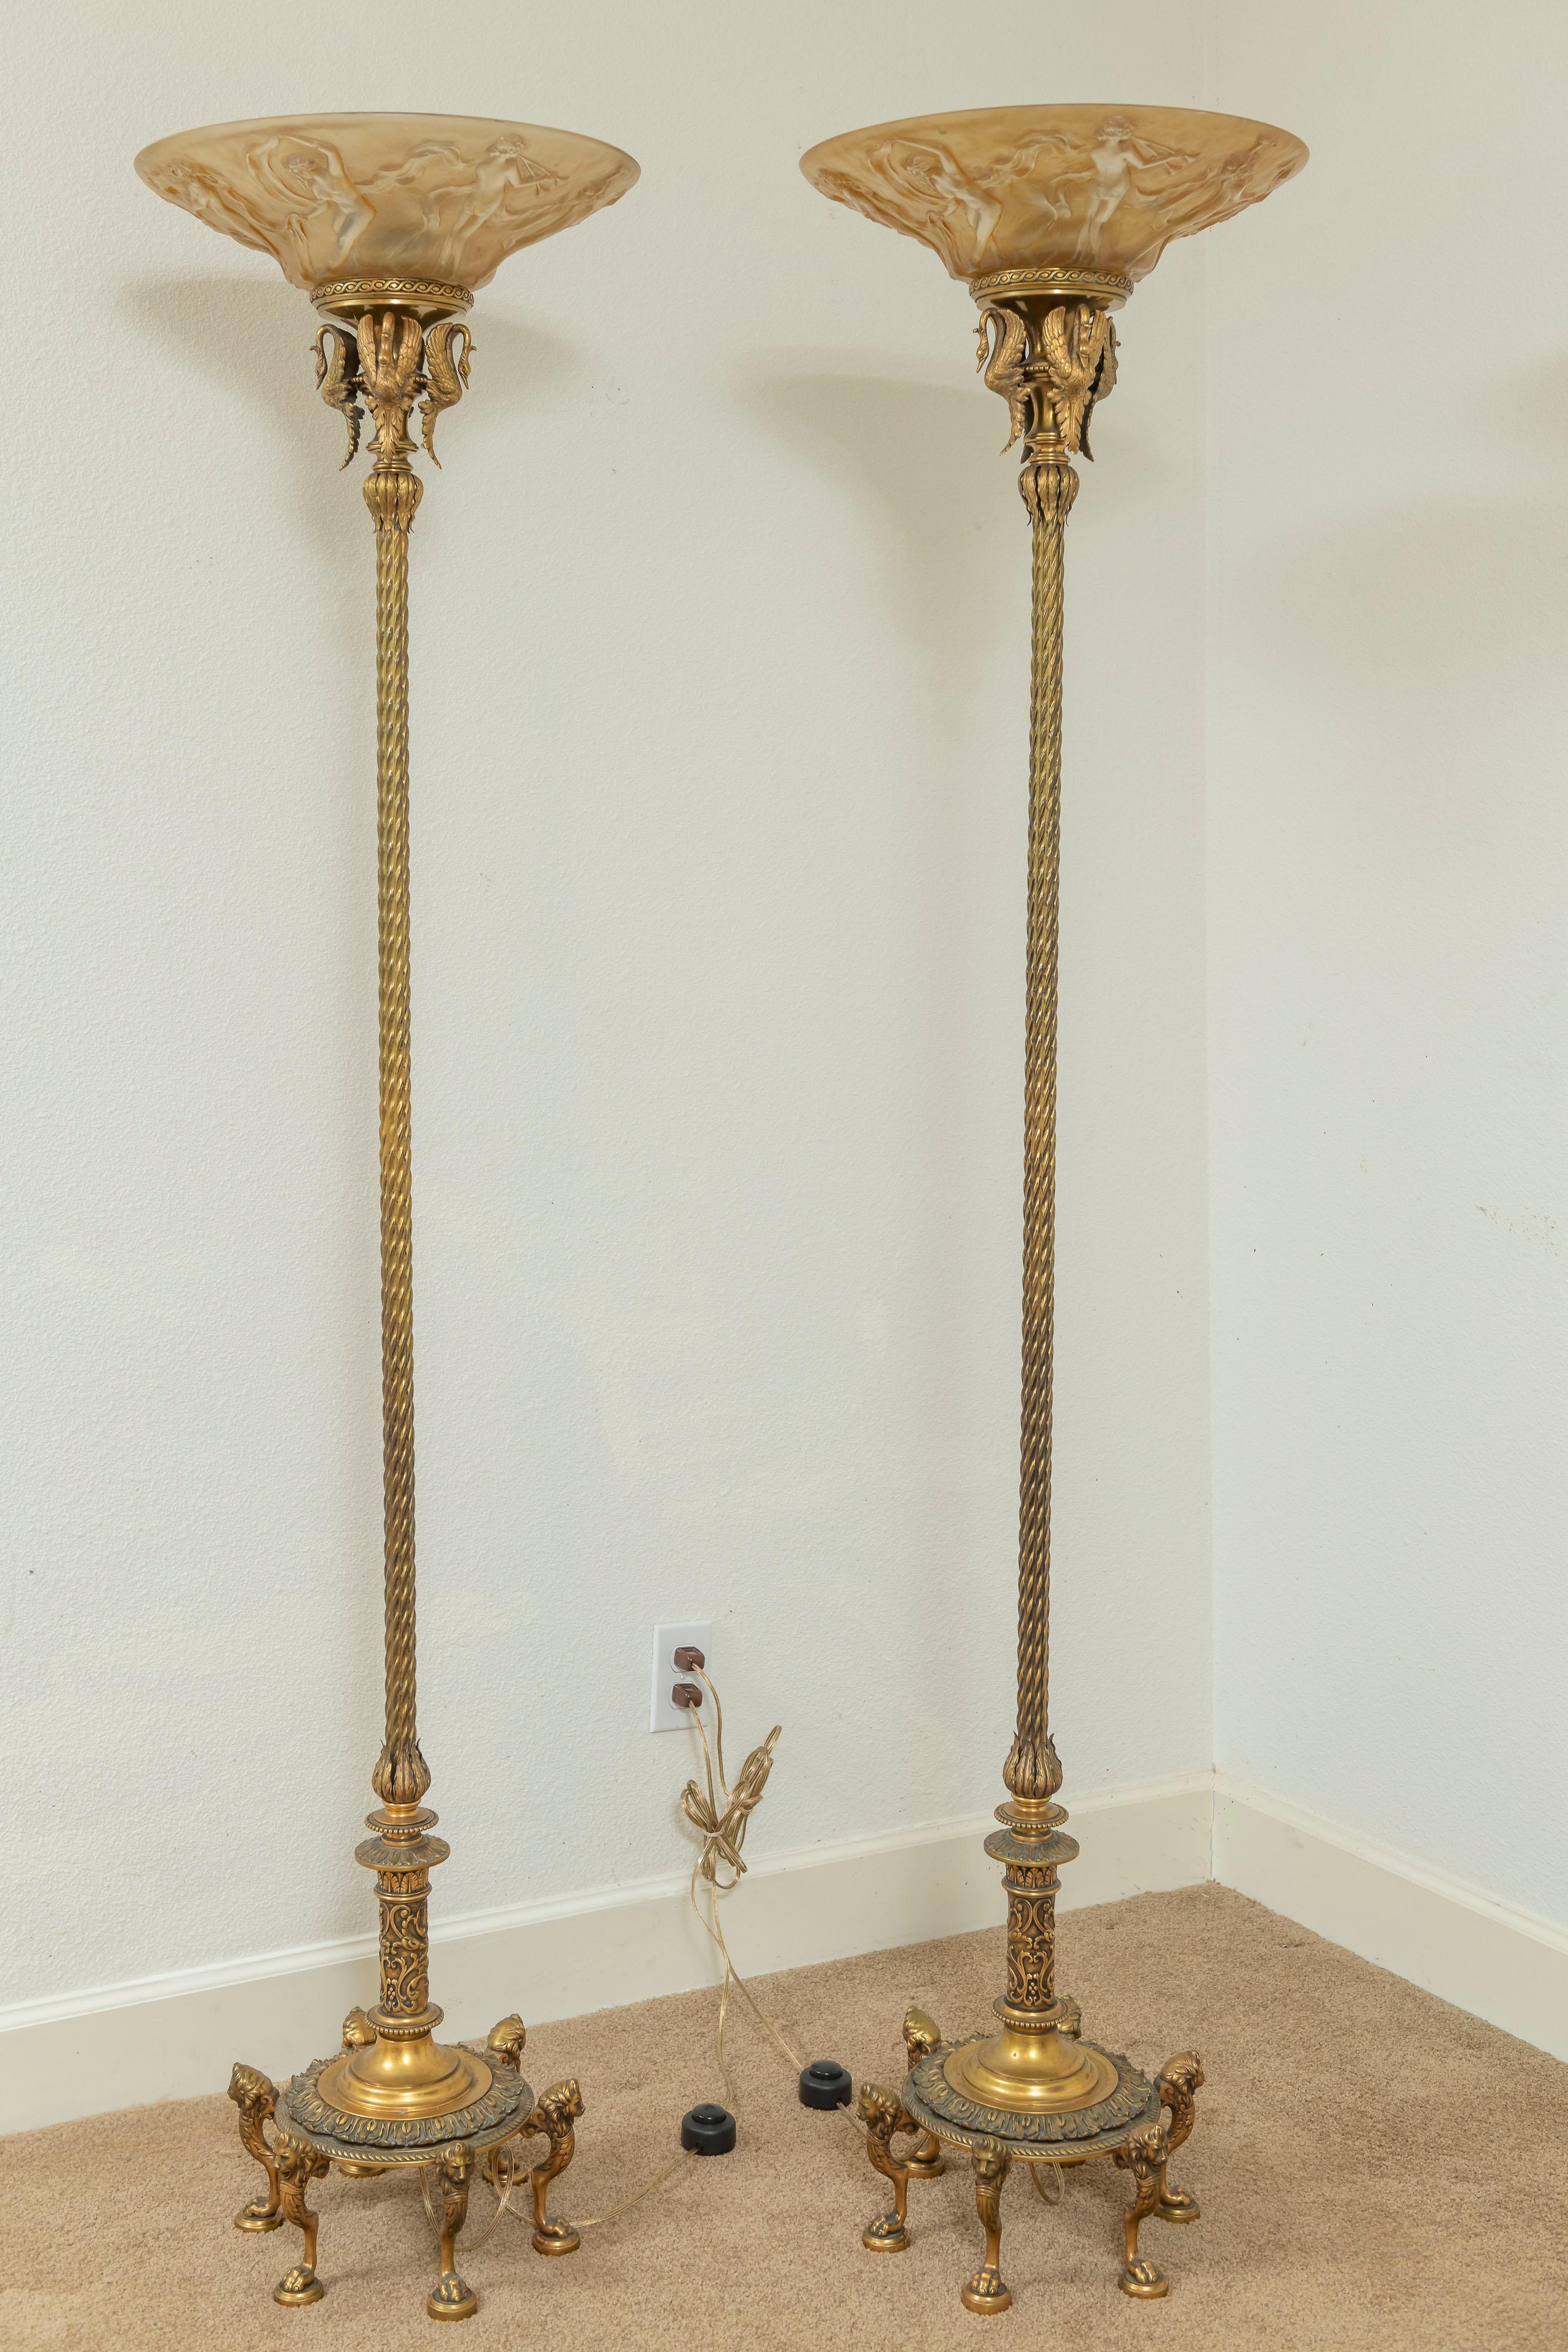 Pair of Bronze & Glass Torchiere Floor Lamps with Nudes on the Glass, circa 1915 5